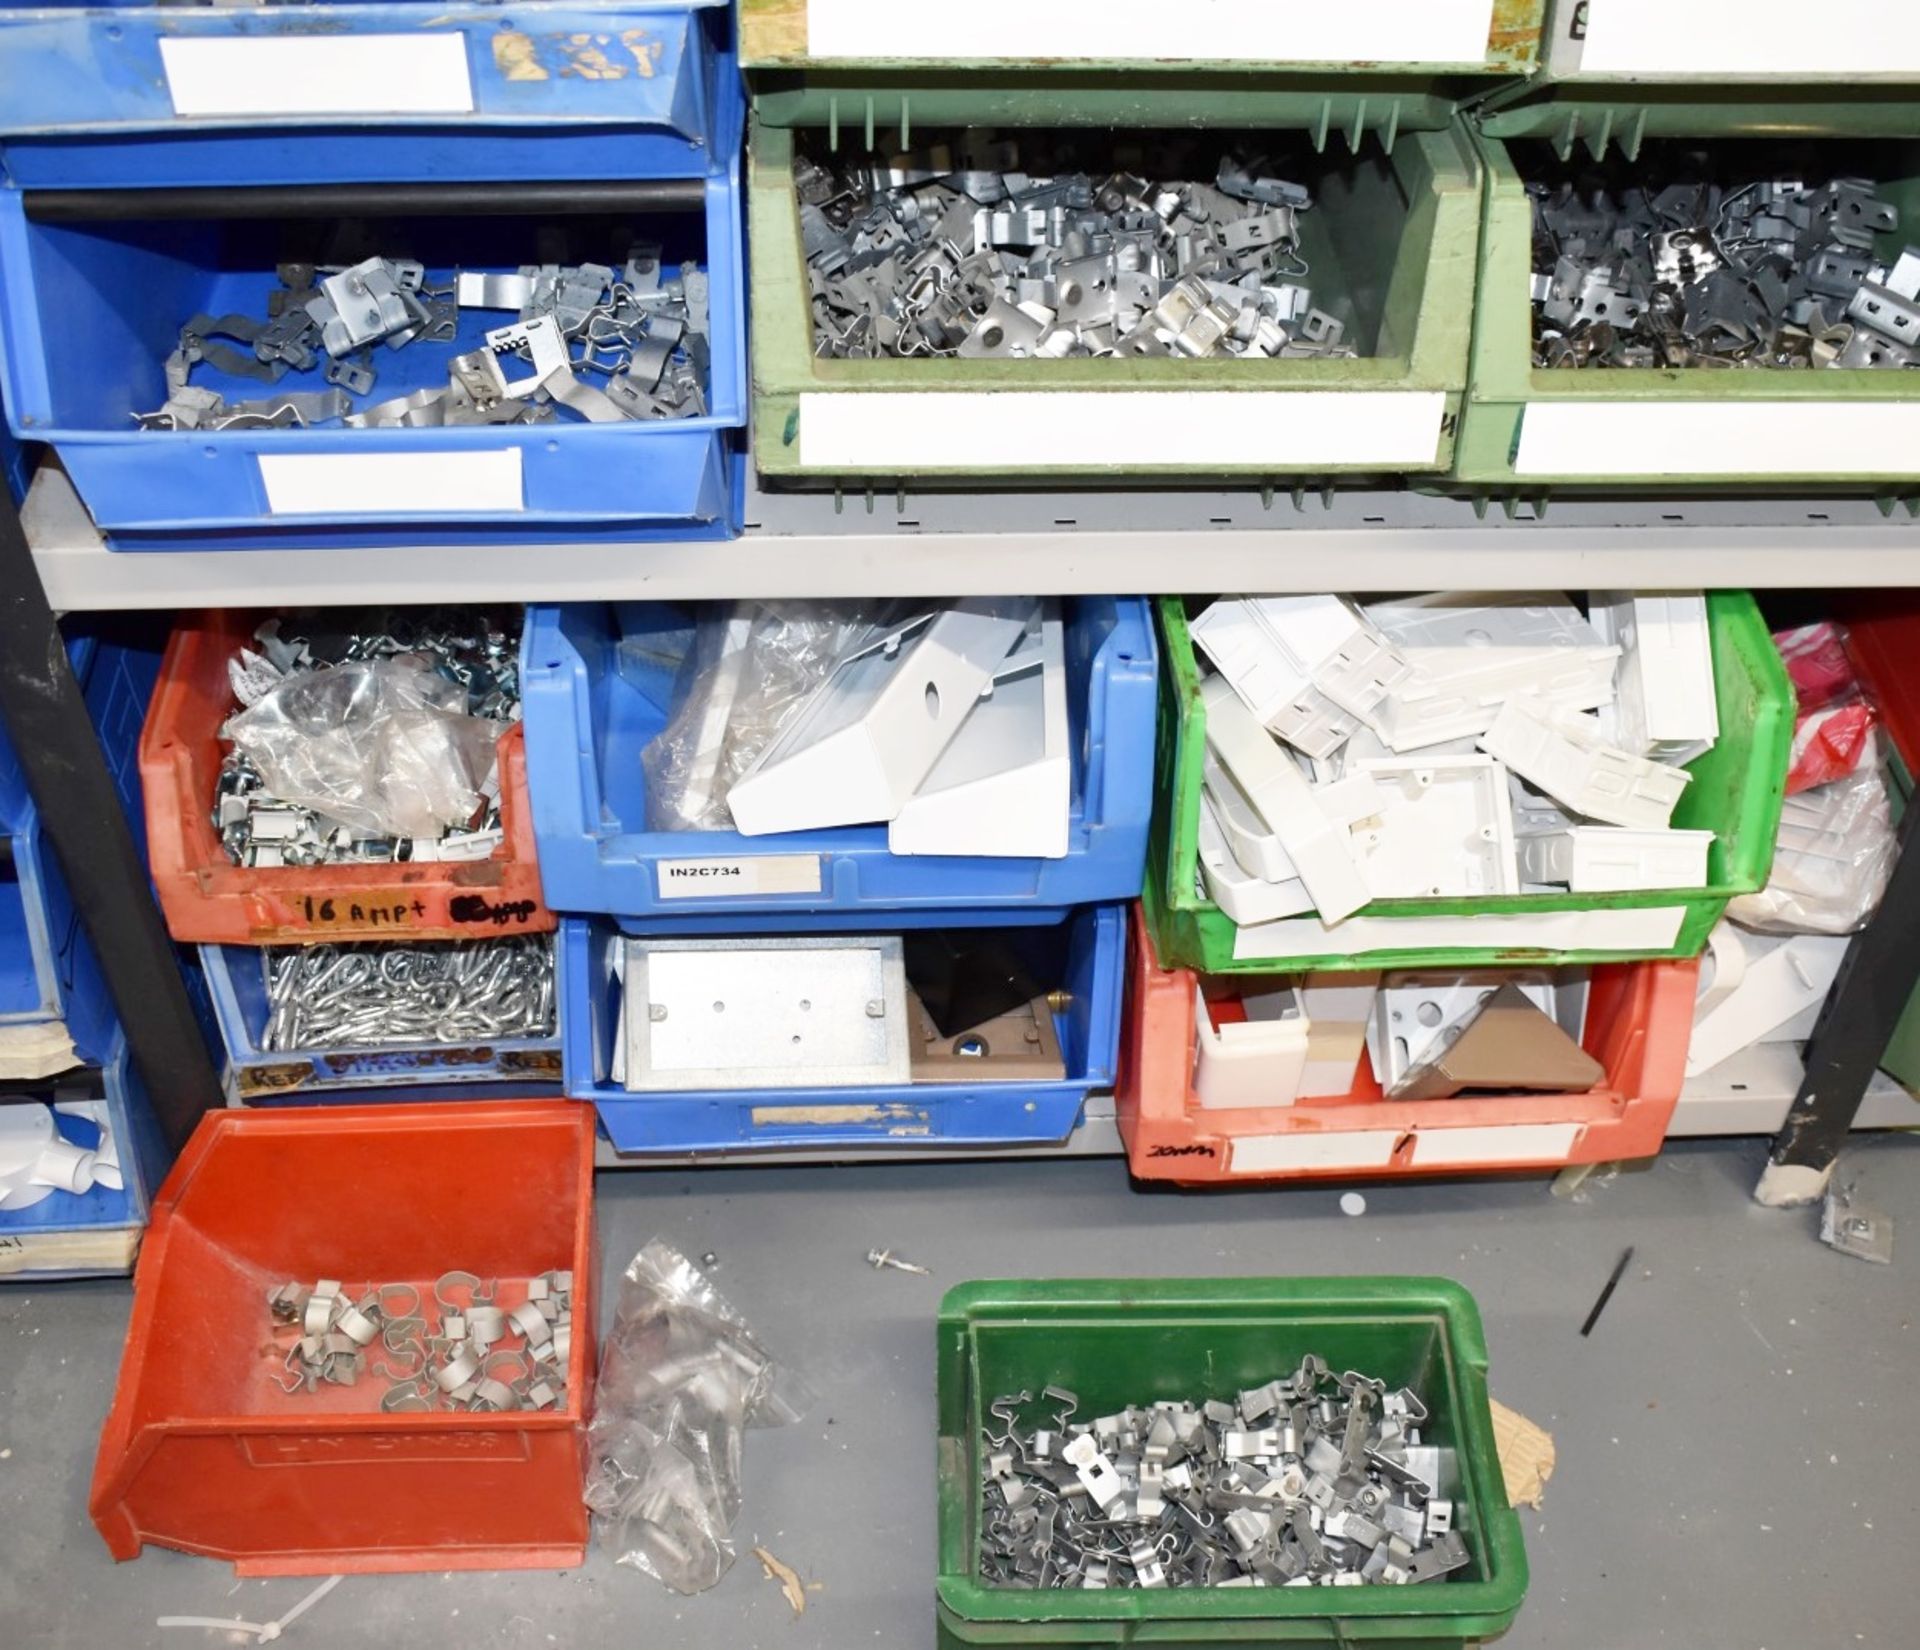 28 x Linbins With Contents & Approx 30 Boxes of Stock - Britclips, Rod Clips, Conduit Clips & More - Image 19 of 19